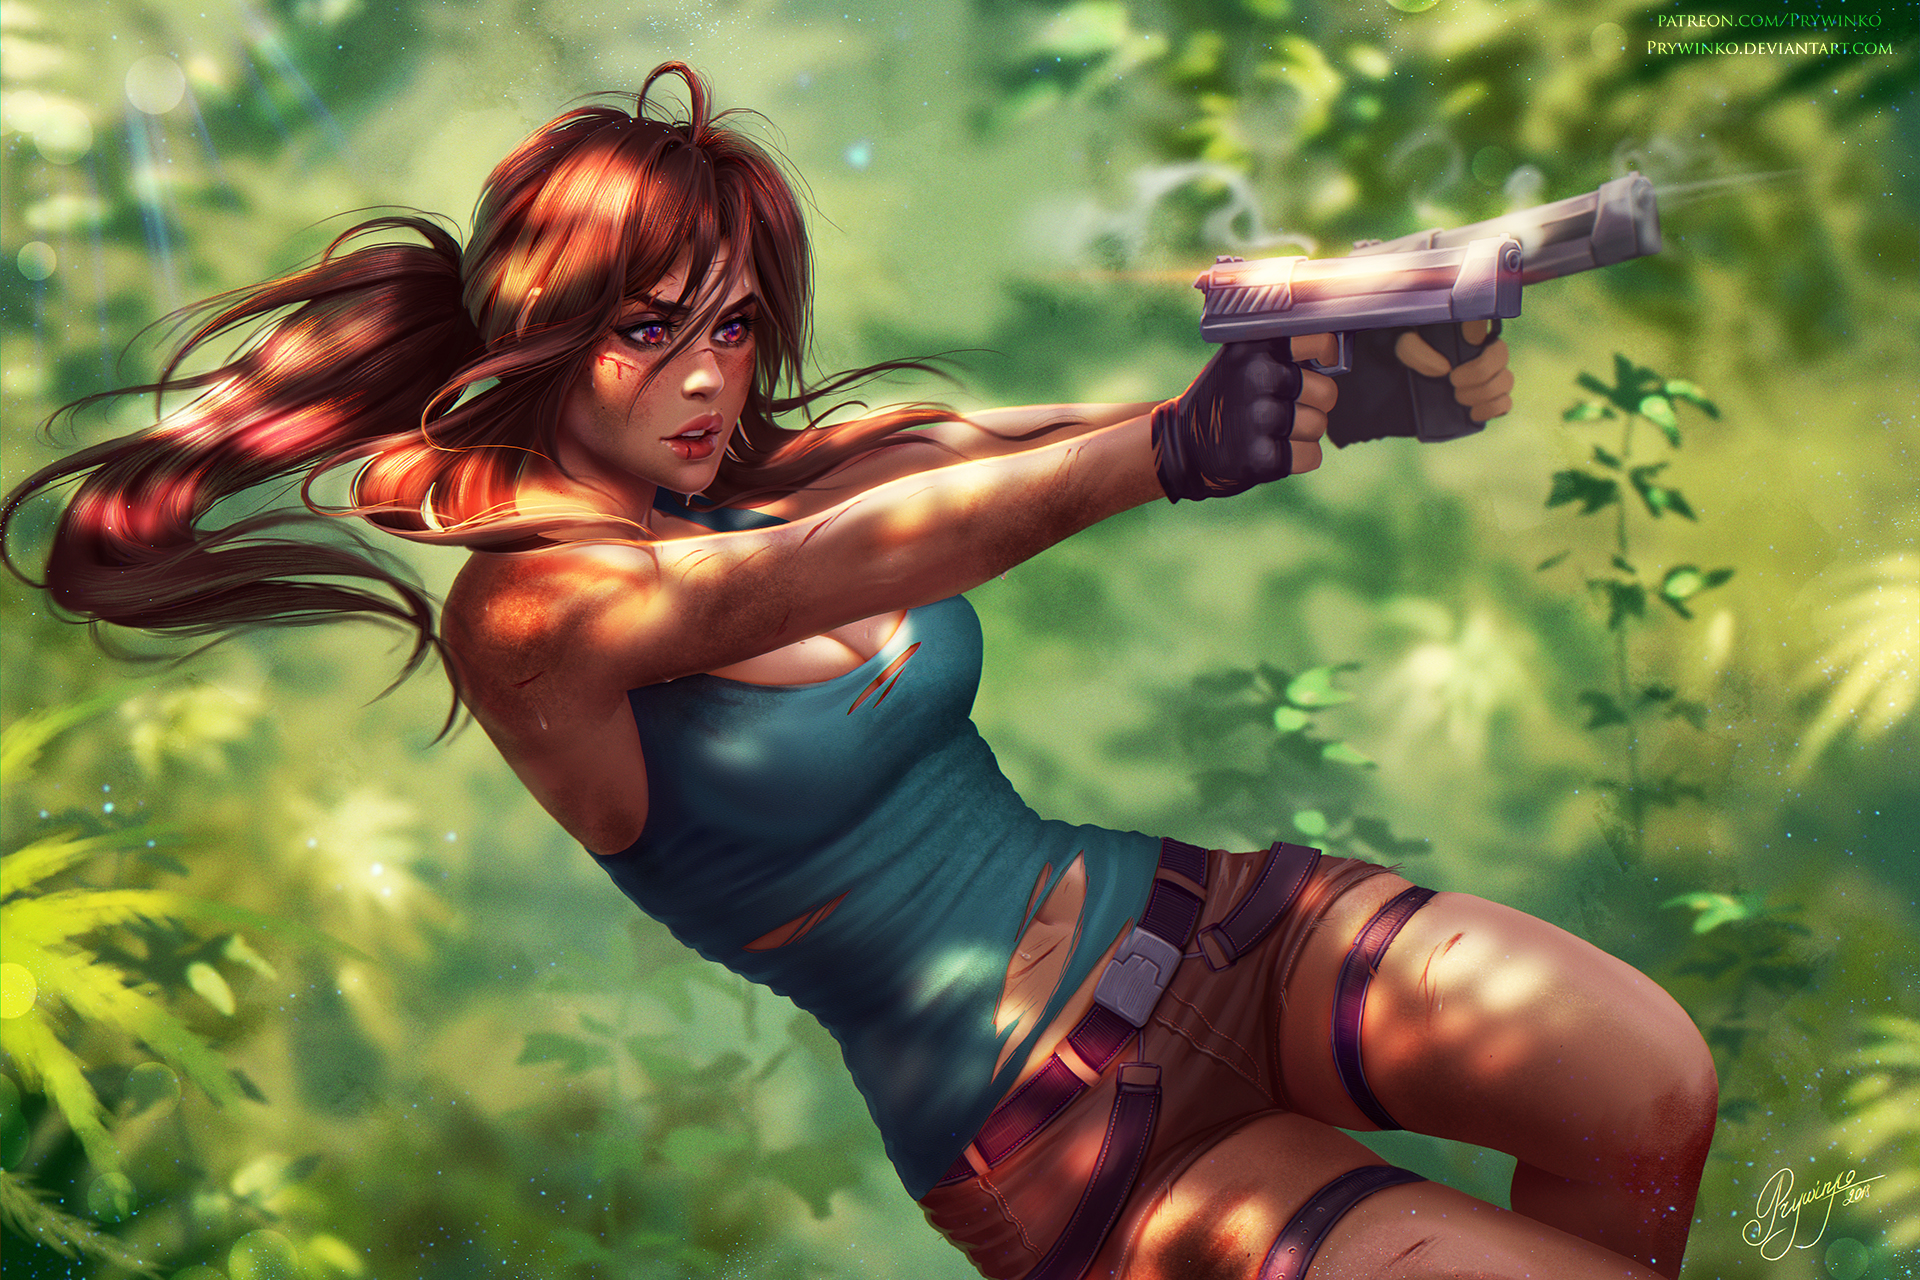 Drawing of Lara Croft girl in the jungle with guns